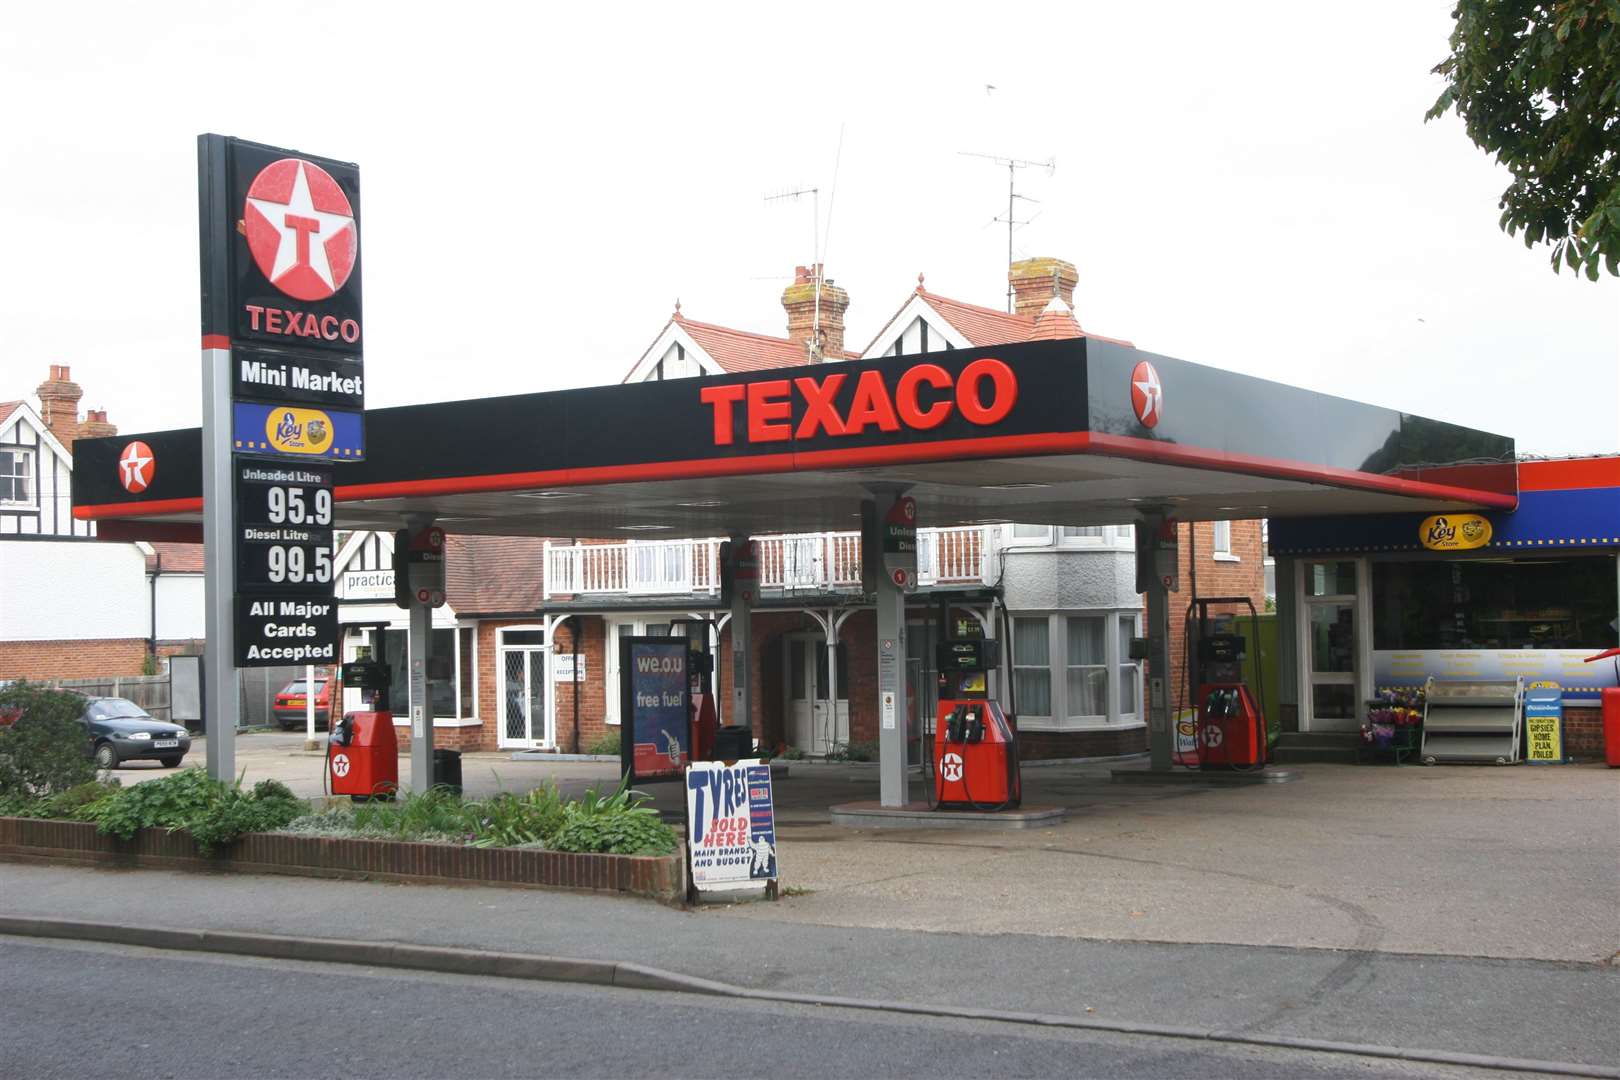 The former Texaco petrol station pictured in 2005